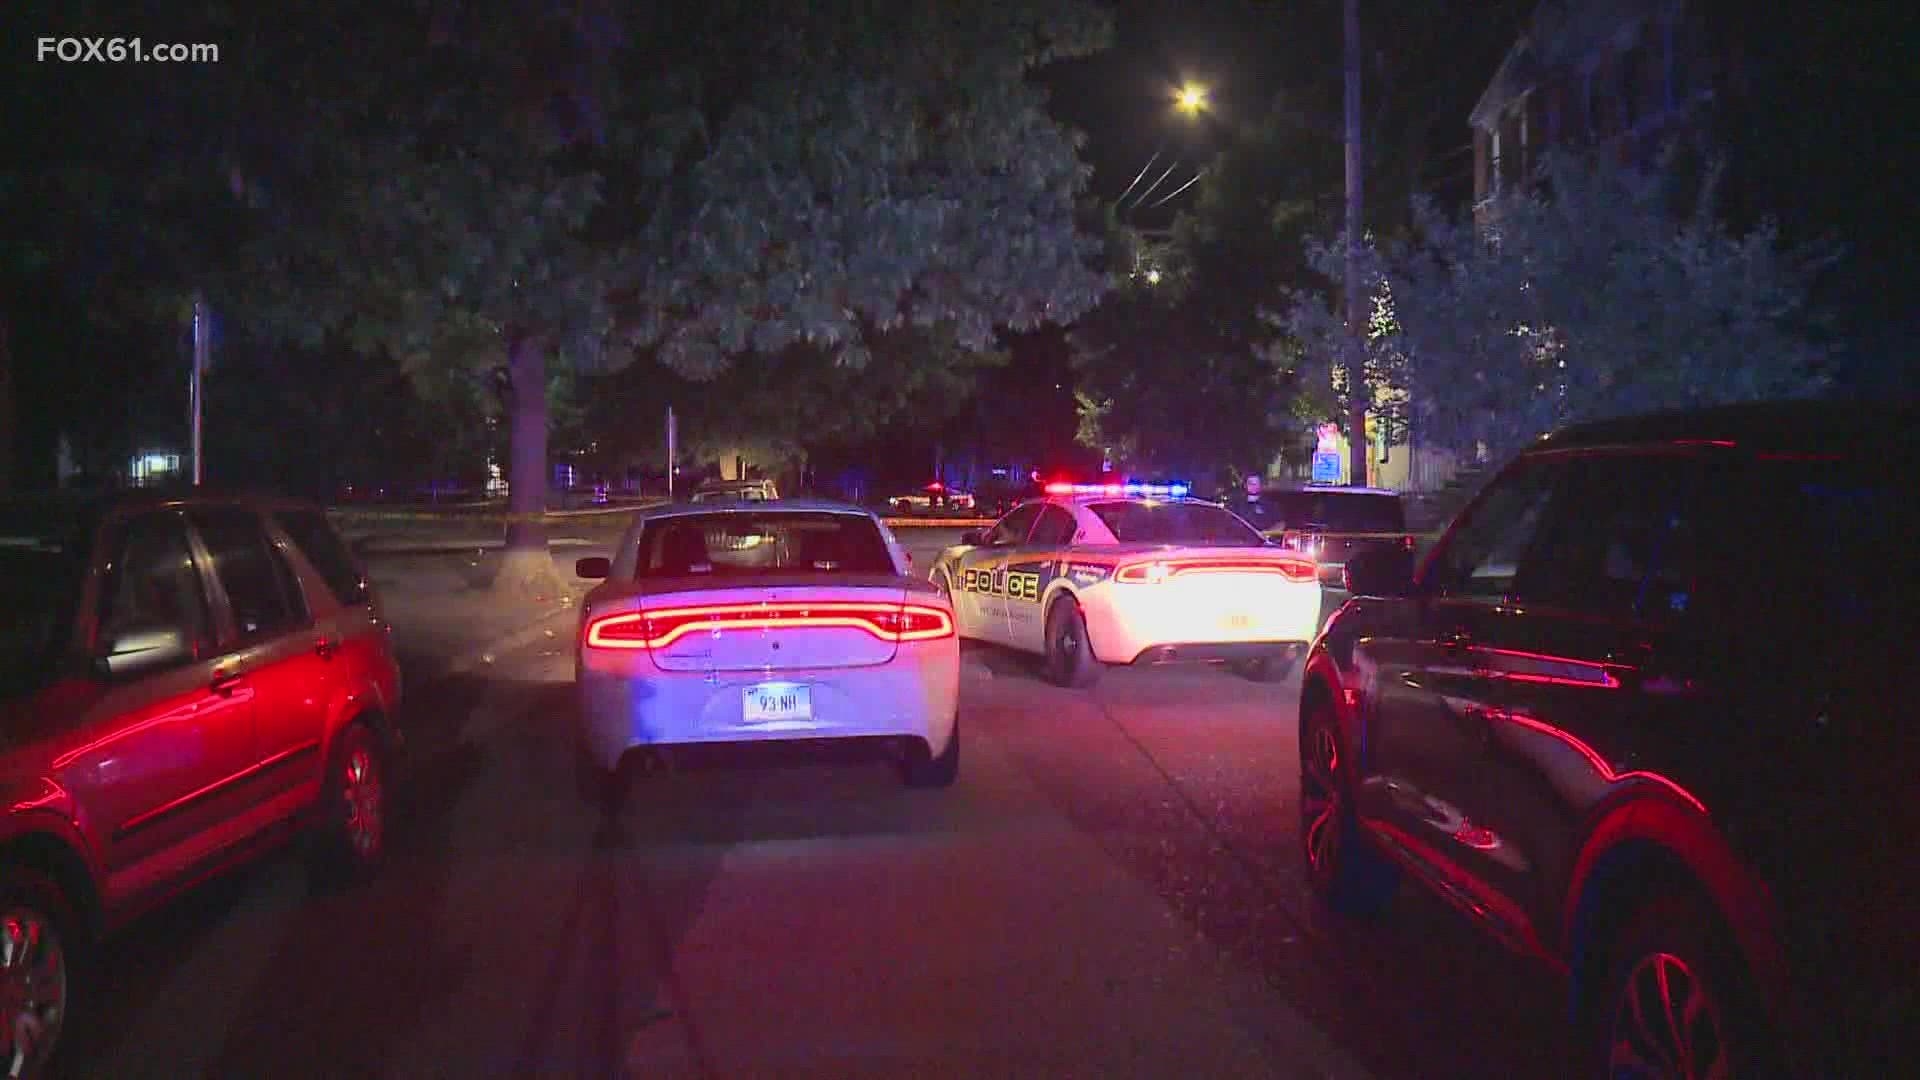 The shooting occurred on Beers Street. Two women and a man were shot in the drive-by.